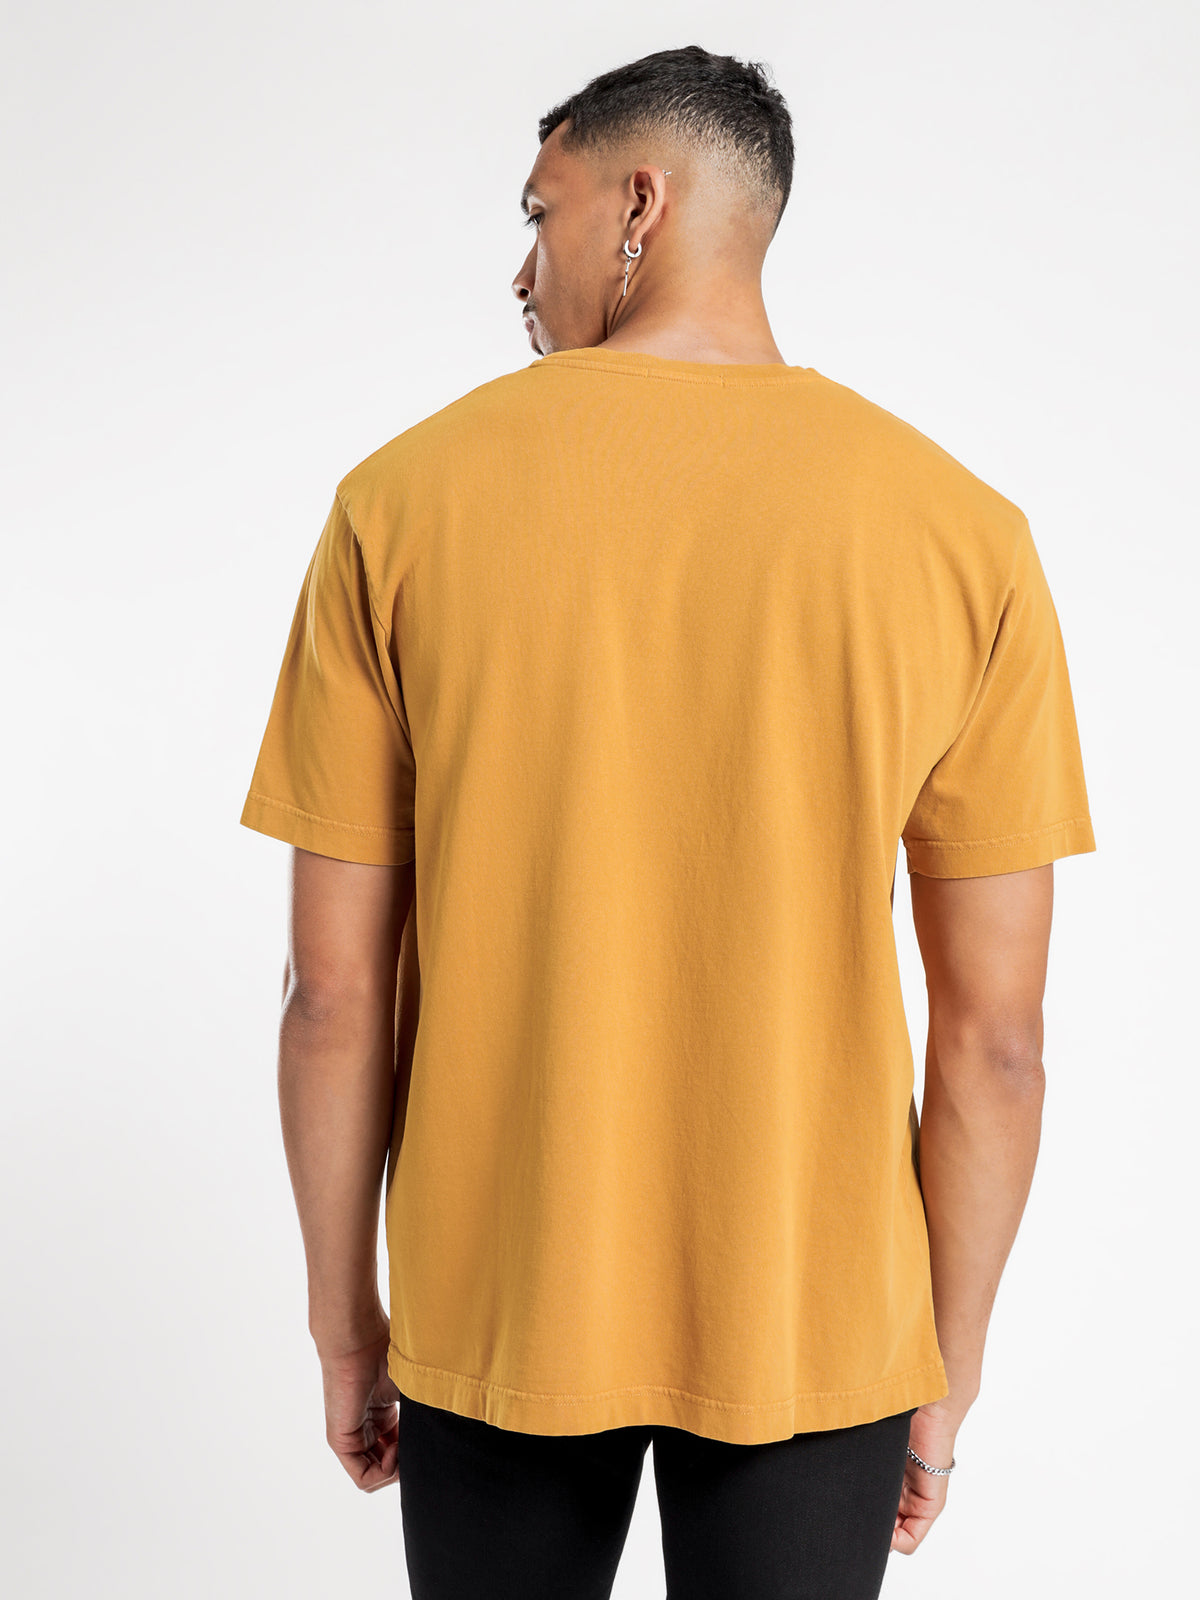 Uno Circle T-Shirt in Amber